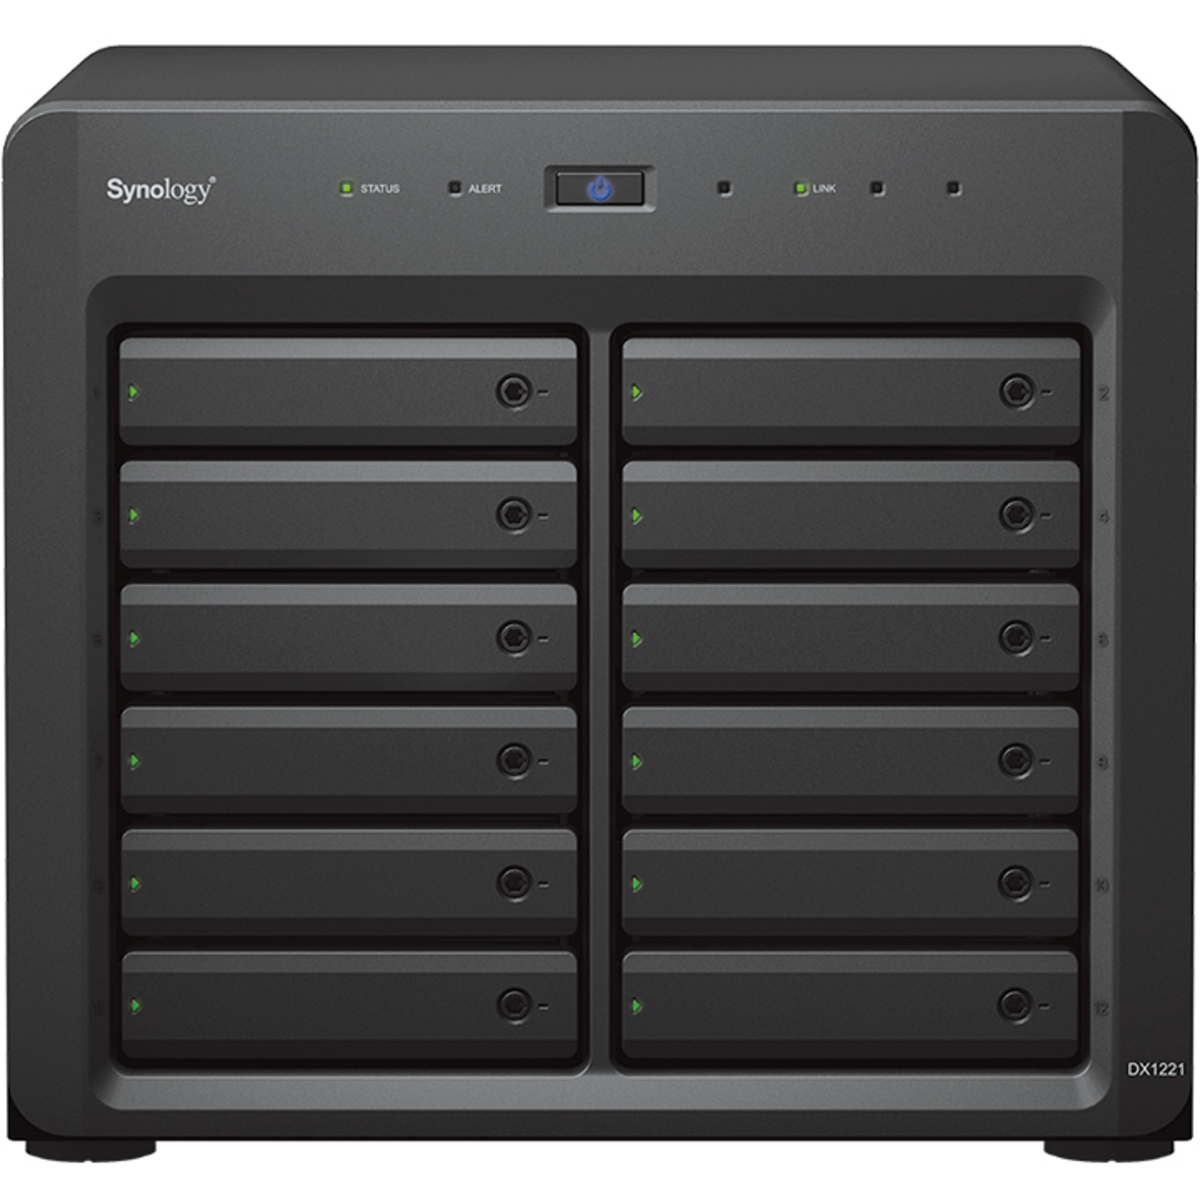 Synology DX1222 External Expansion Drive 20tb 12-Bay Desktop Multimedia / Power User / Business Expansion Enclosure 10x2tb Crucial MX500 CT2000MX500SSD1 2.5 560/510MB/s SATA 6Gb/s SSD CONSUMER Class Drives Installed - Burn-In Tested DX1222 External Expansion Drive